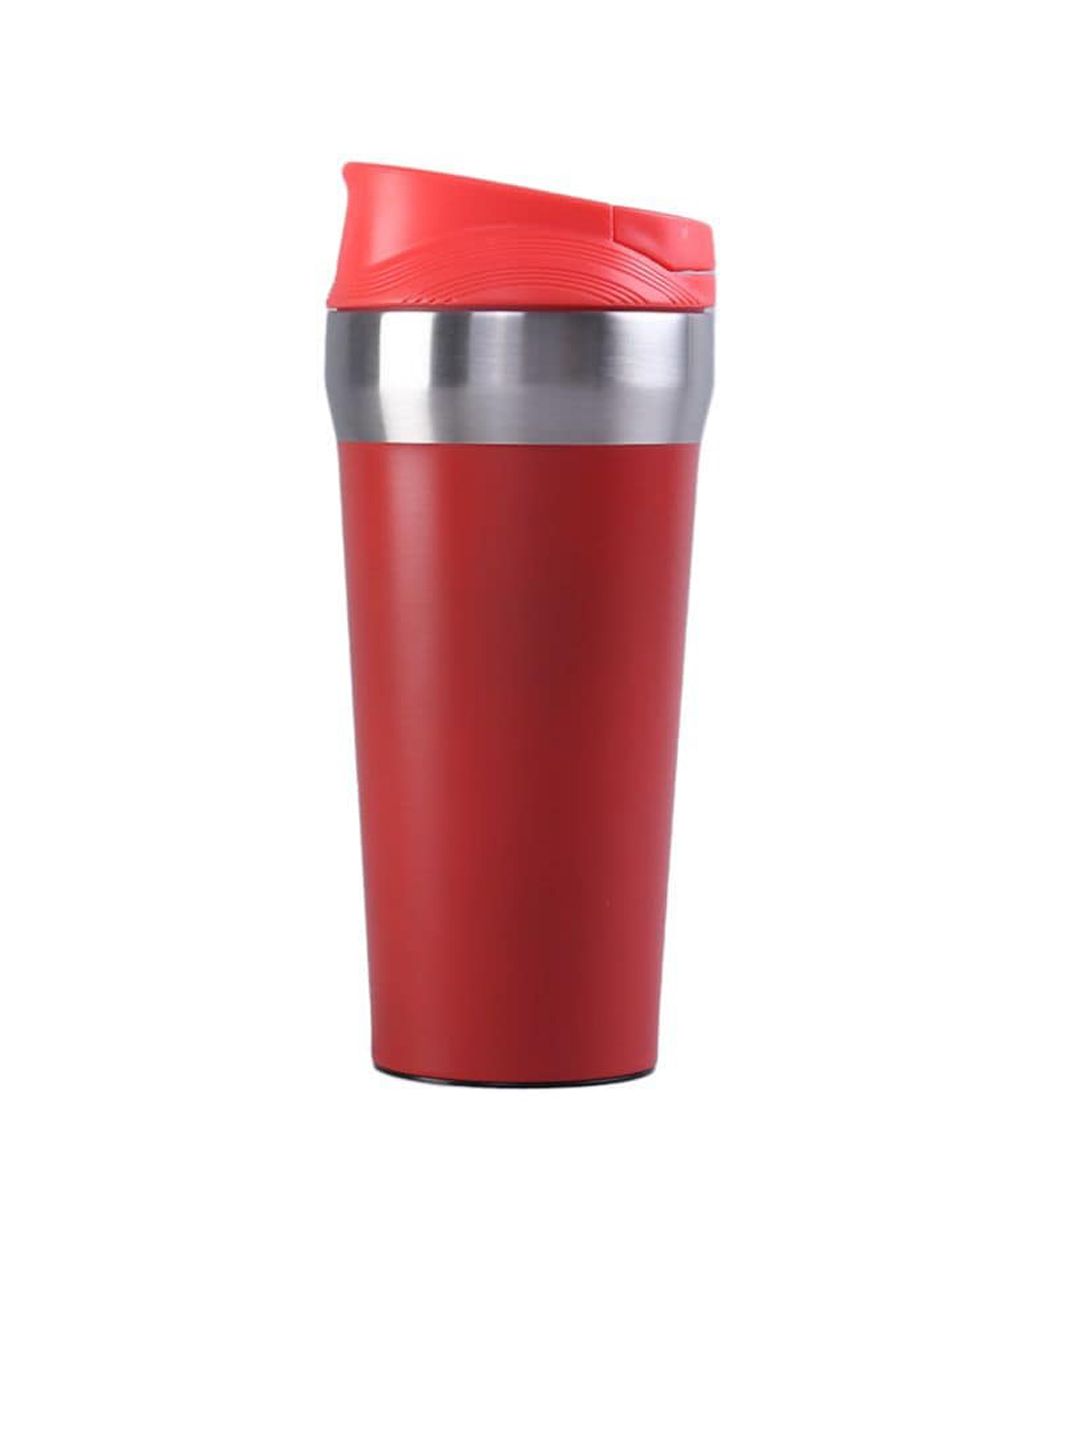 Wonderchef Red Stainless Steel Flask 380 ml Price in India